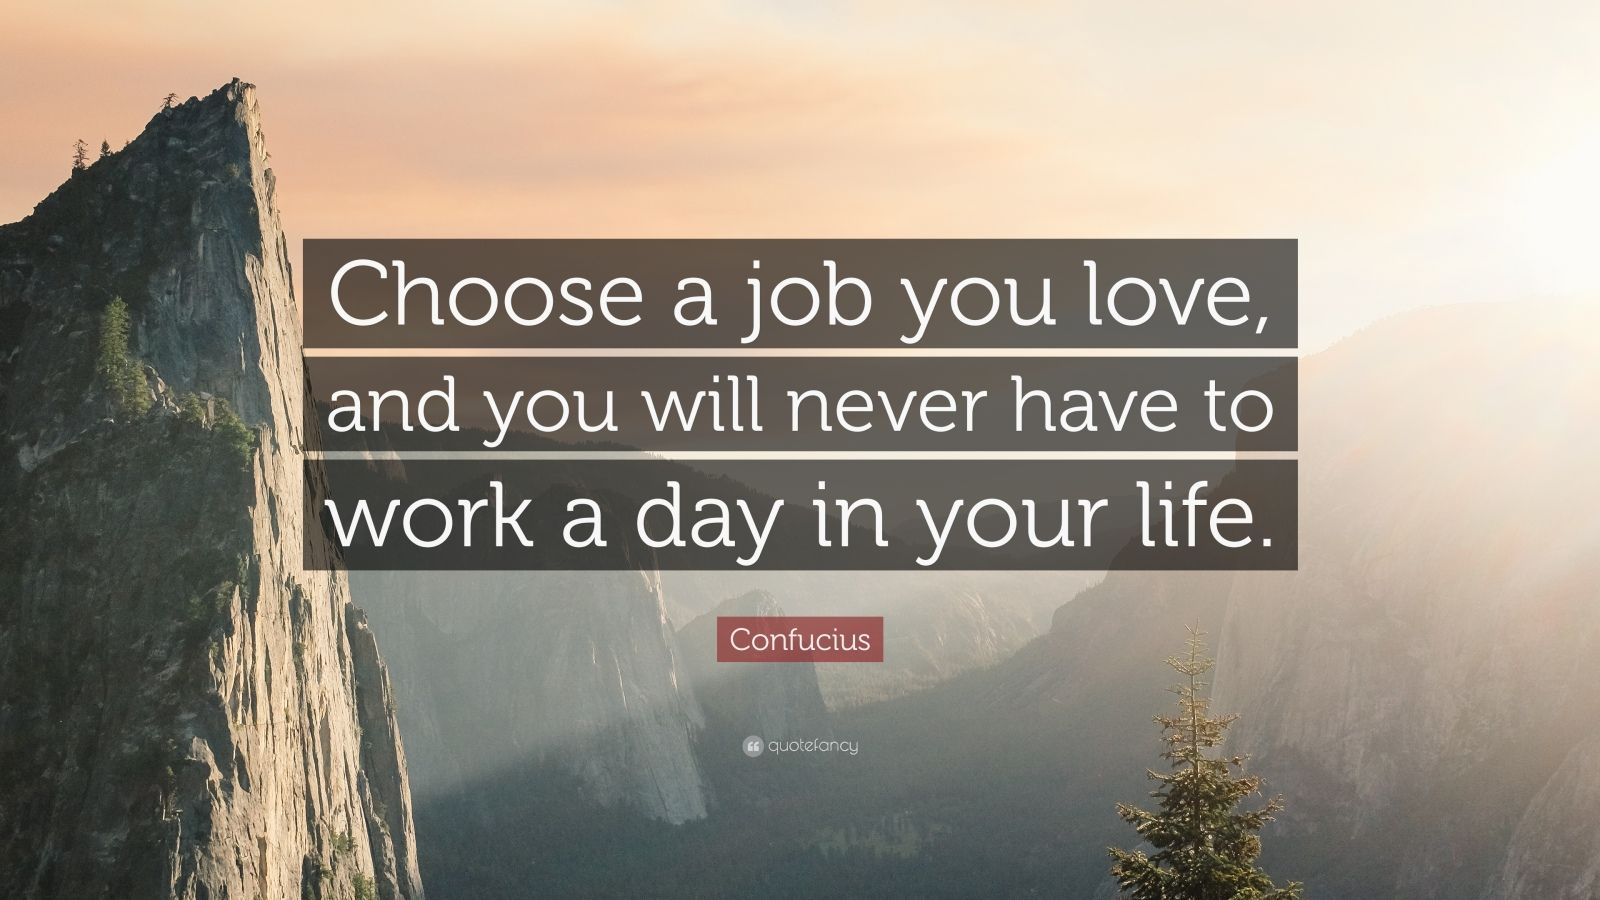 Confucius Quote: “Choose a job you love, and you will never have to